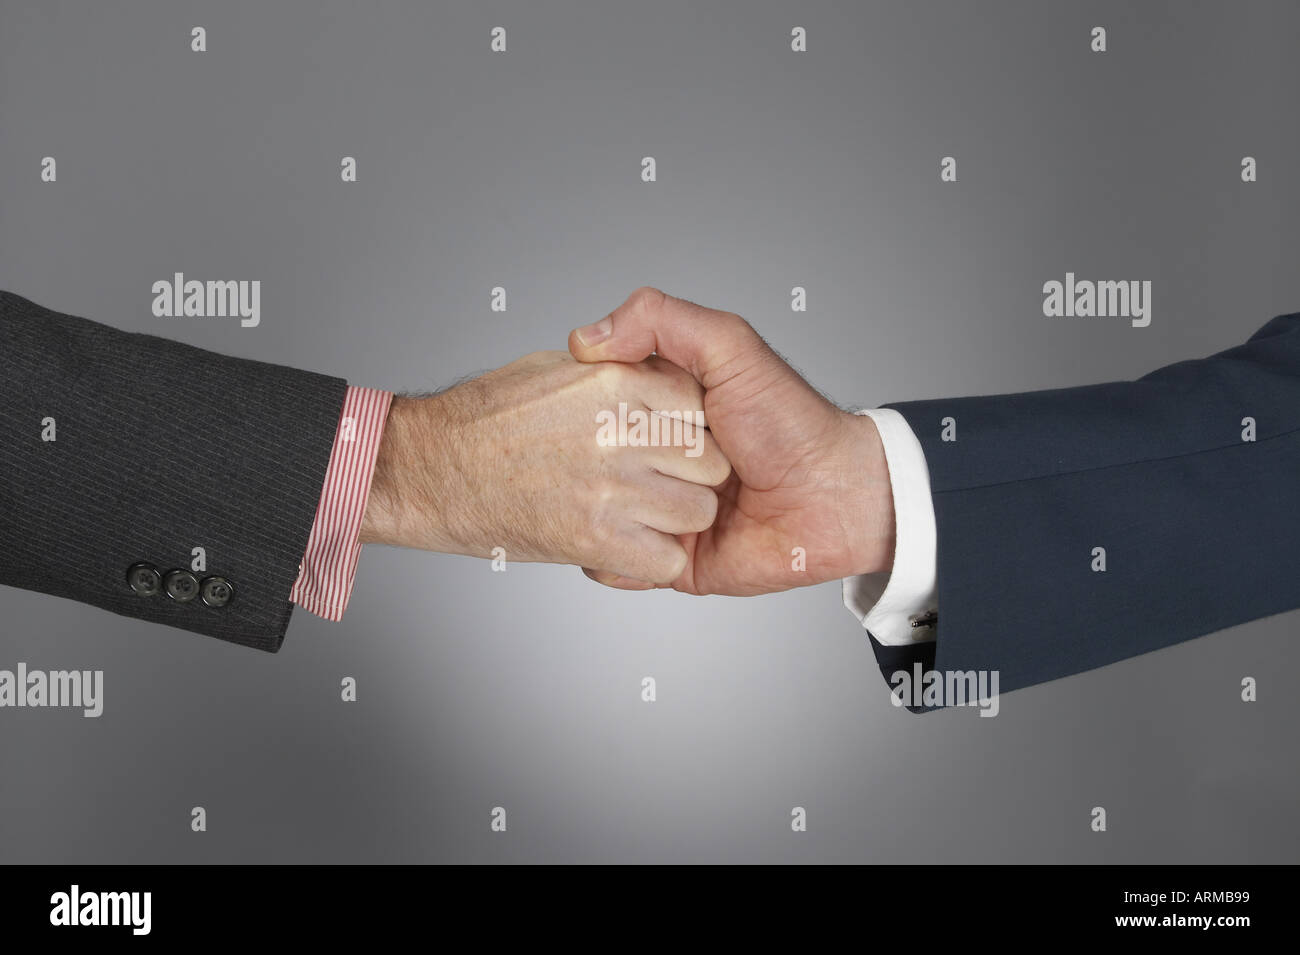 Strong finger grip handshake of hand and fingers of two corporate business  men in suits gesture of complex teamwork working together and partnership  Stock Photo - Alamy